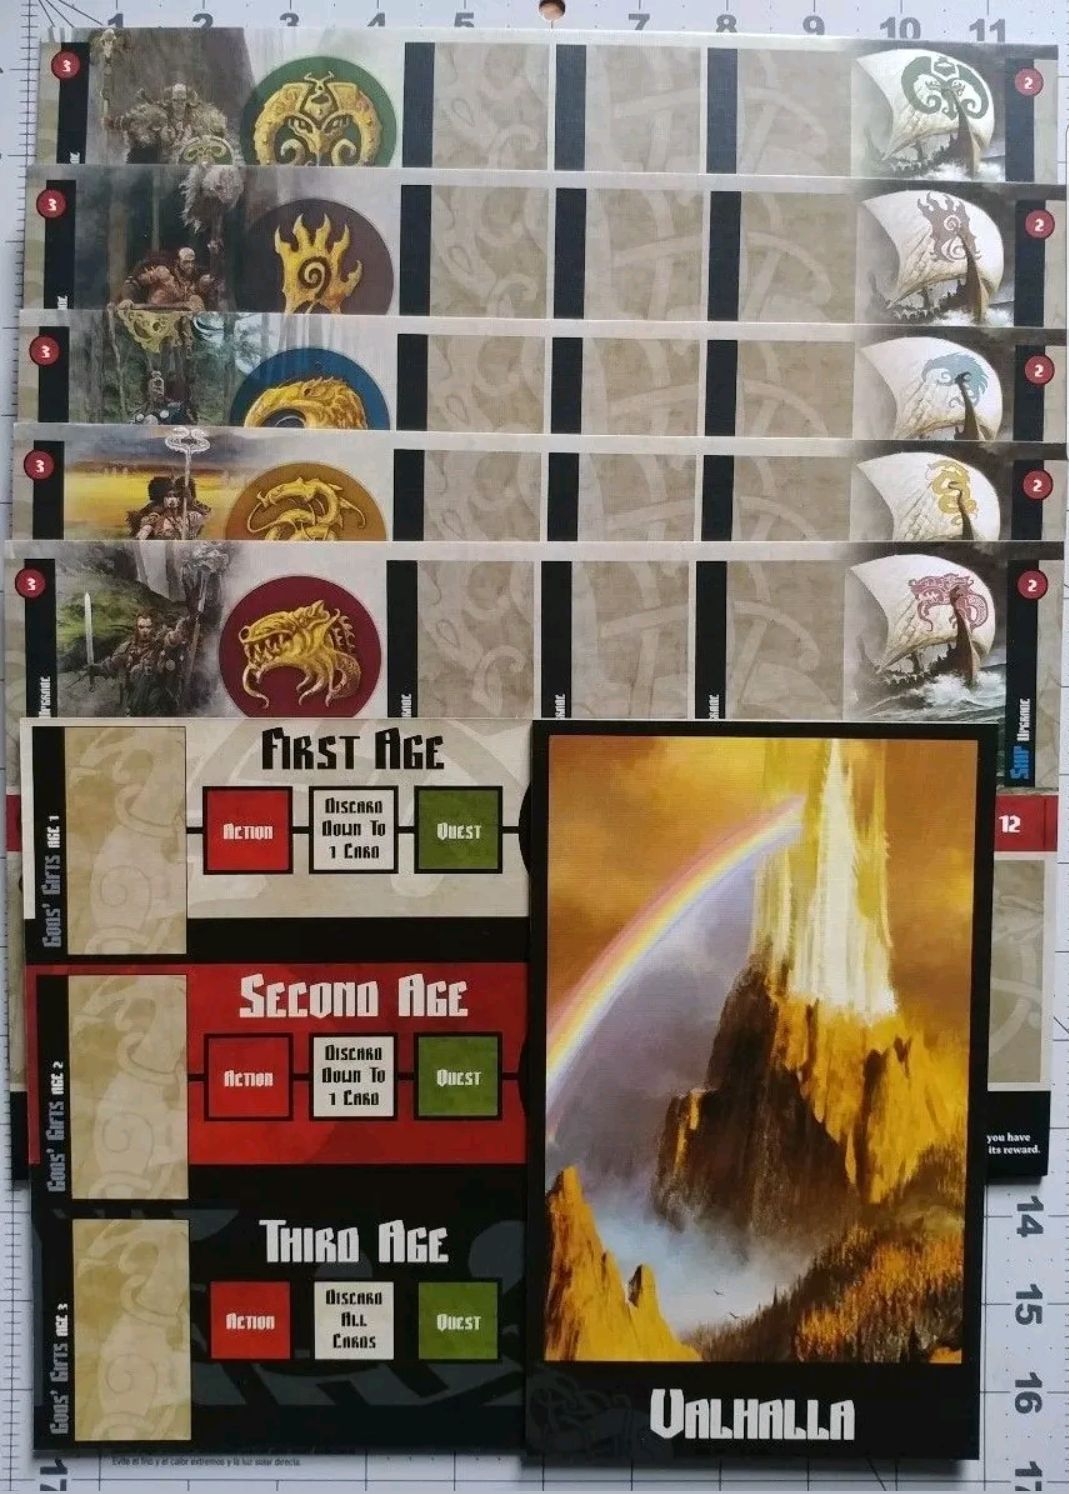 Blood Rage: Promo Thick Card Clan - Valhalla & Age Track Boards  (2-4) board game collectible - Main Image 1